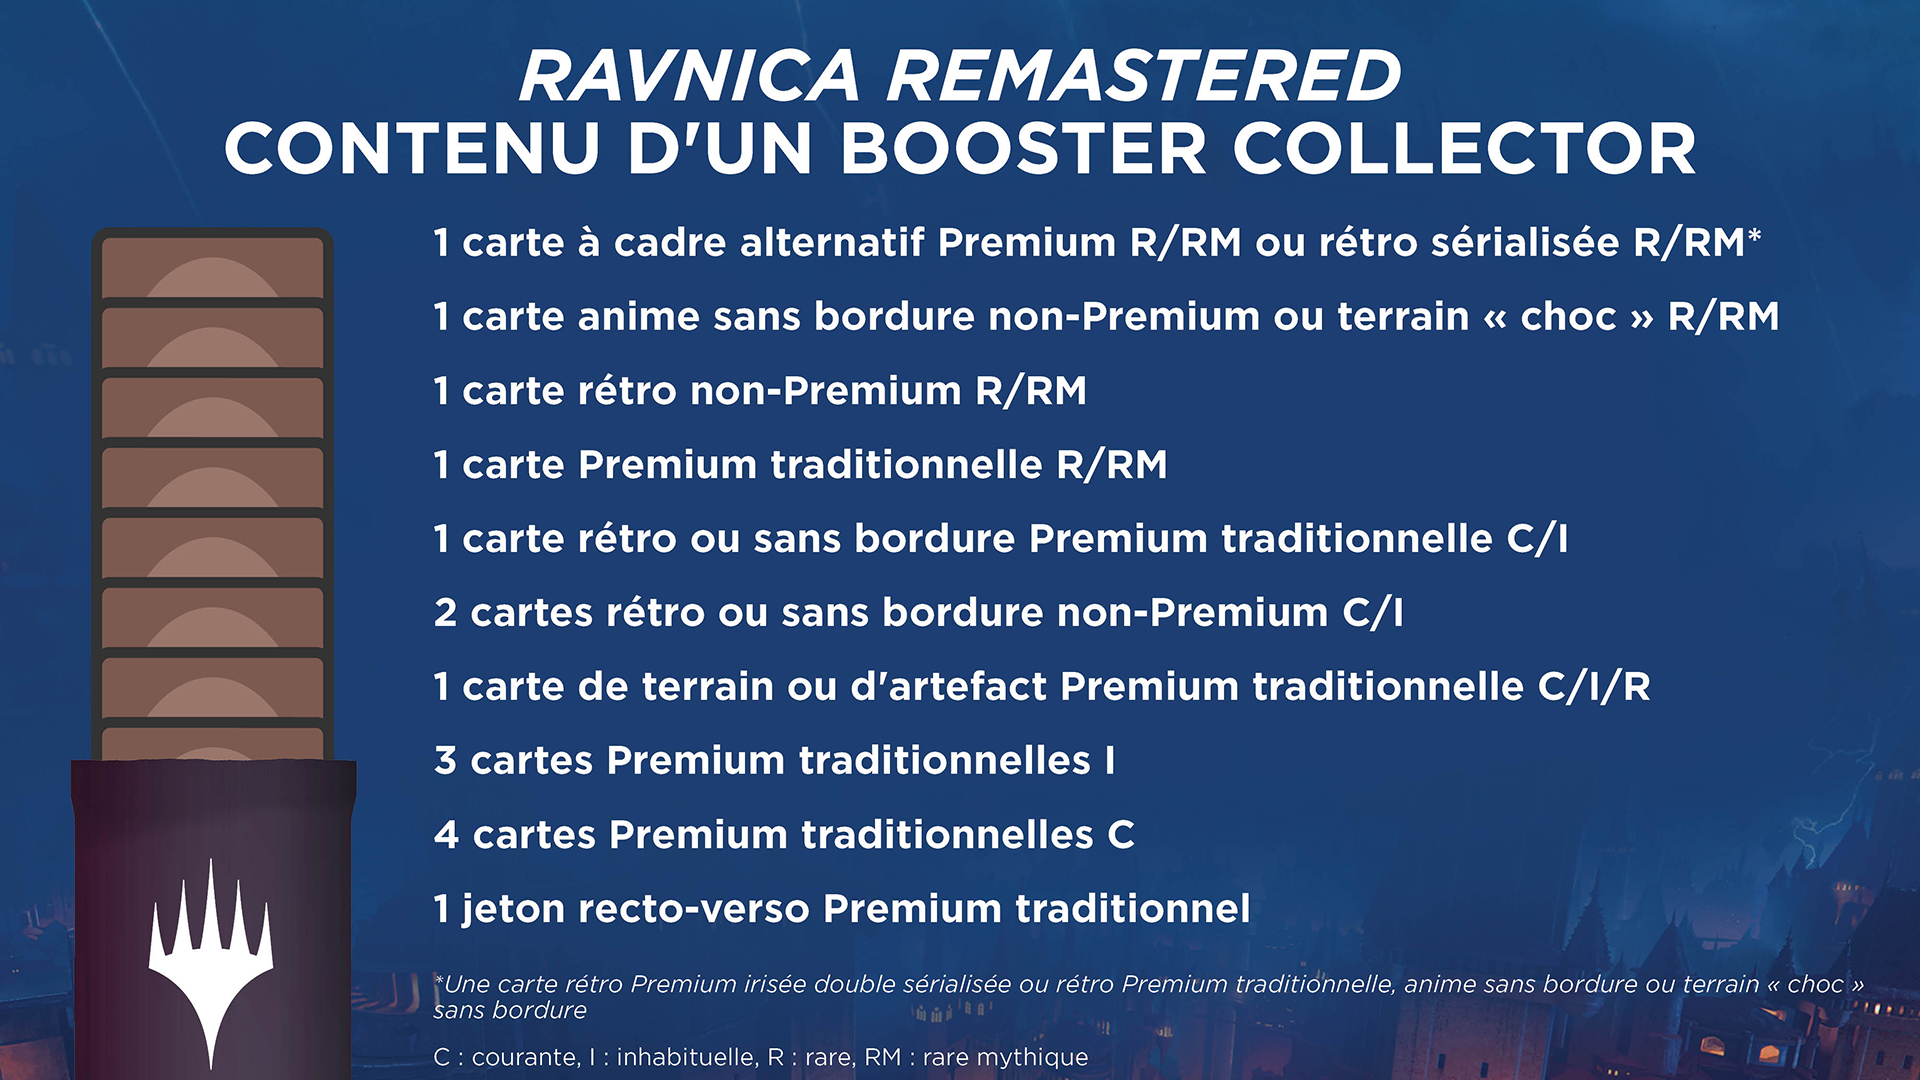 Récapitulatif des boosters collector Ravnica Remastered